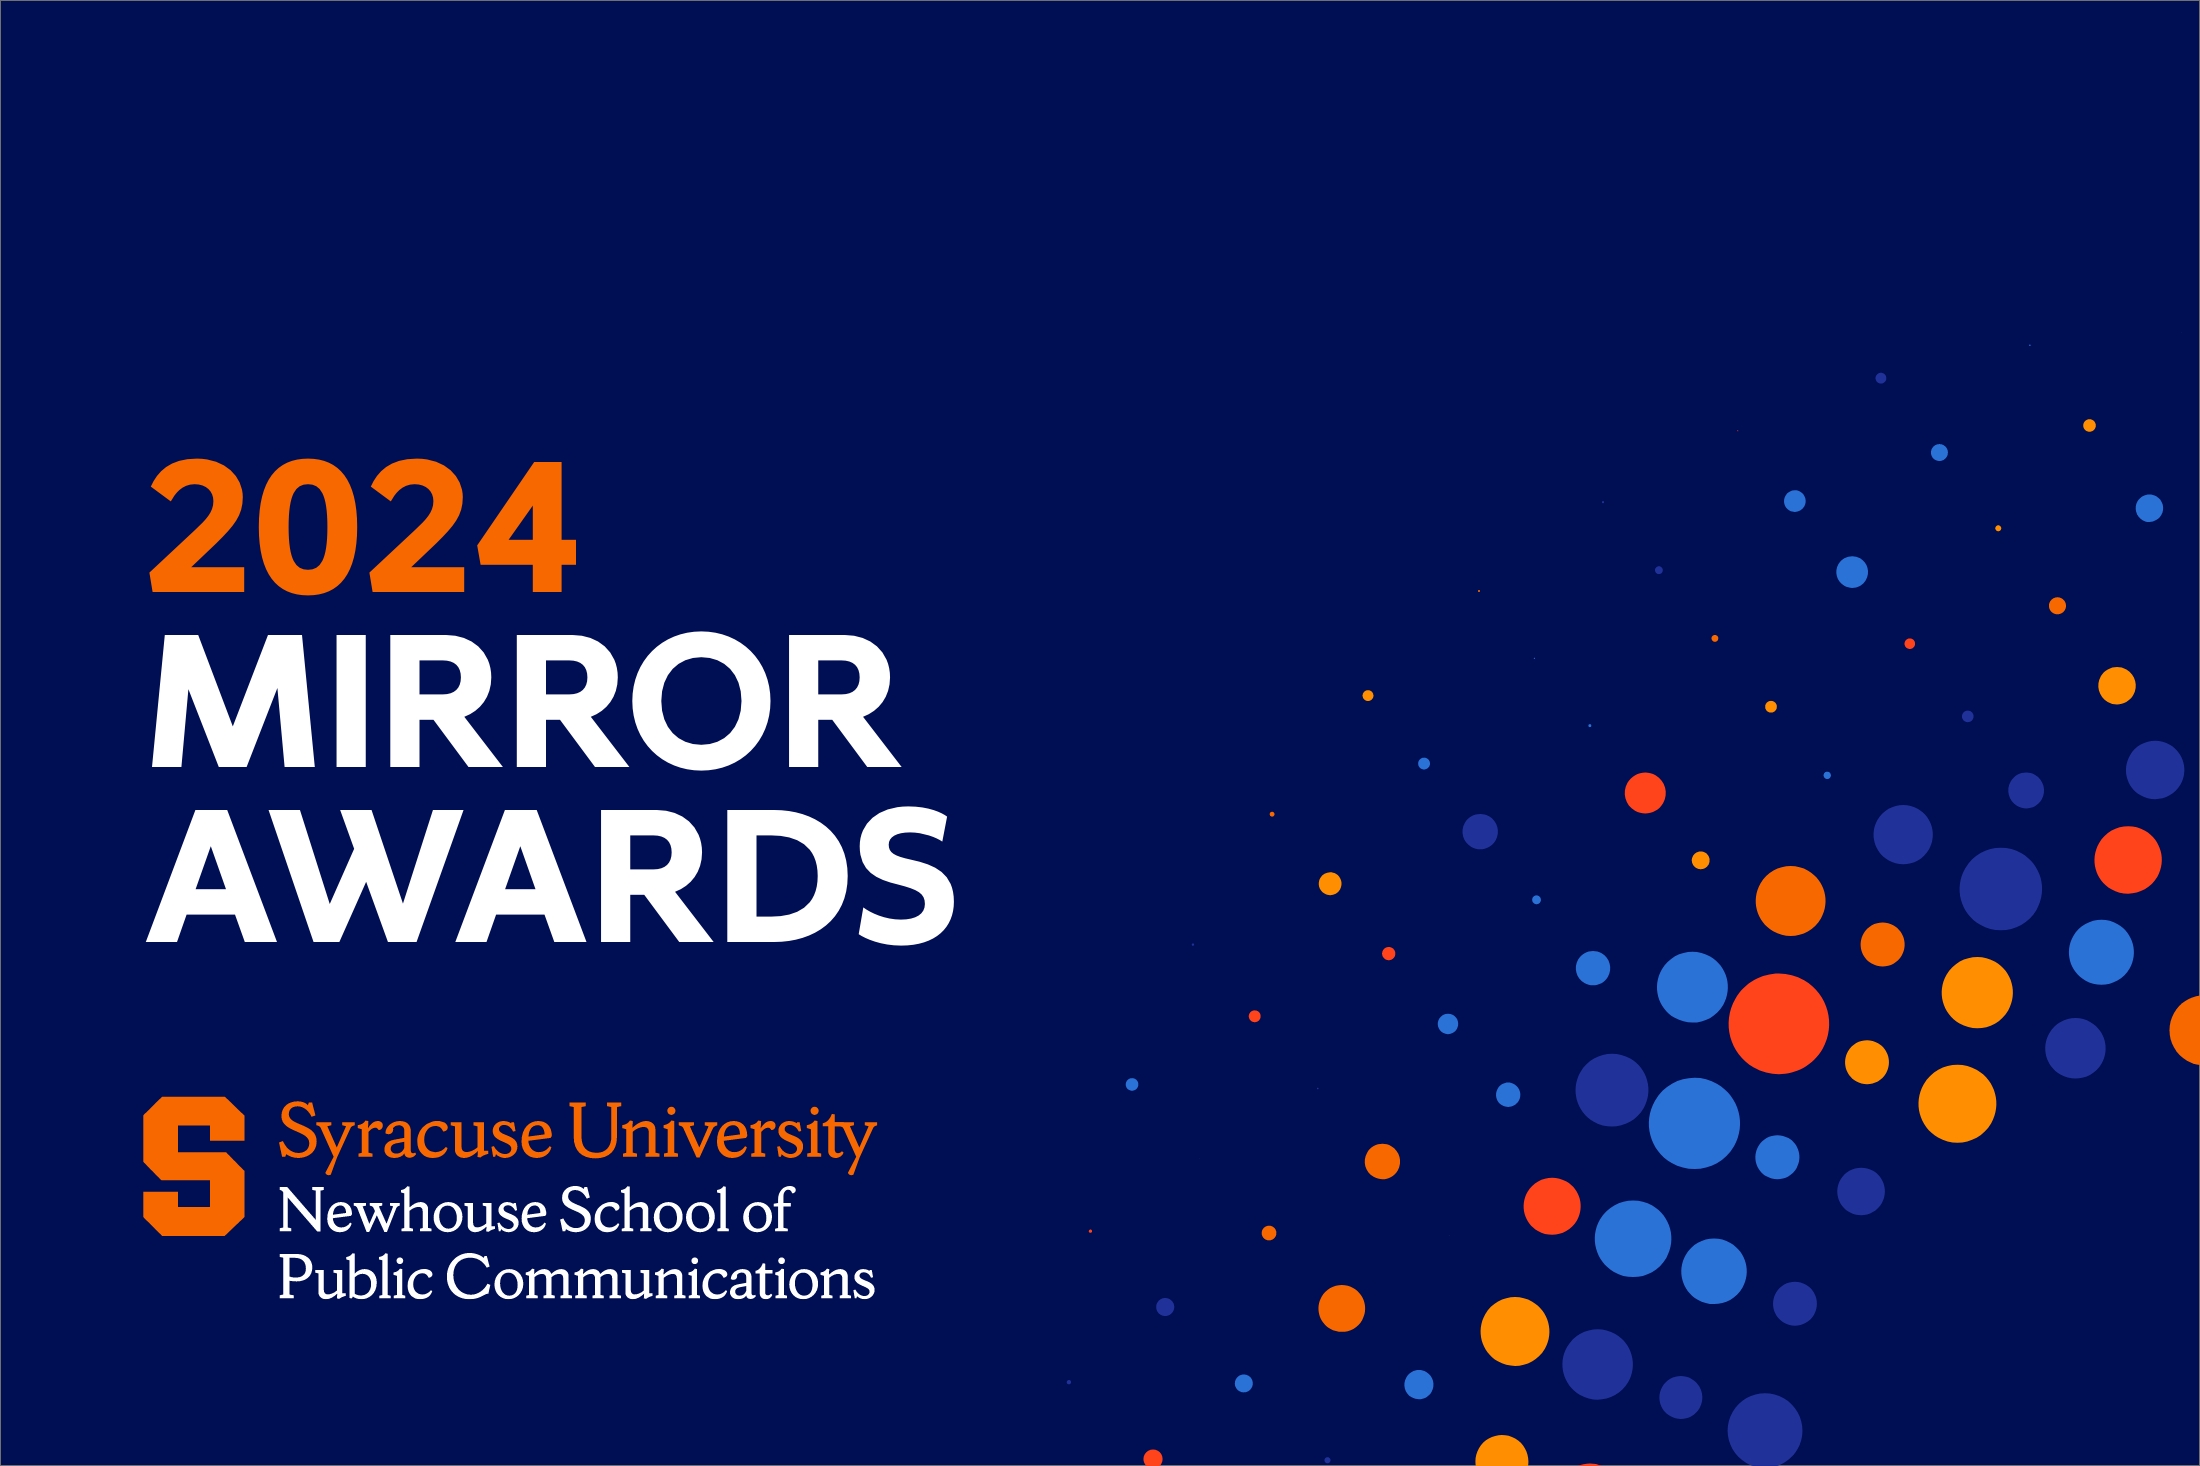 the words "2024 Mirror Awards" on a navy blue background with the Newhouse School label underneath the words